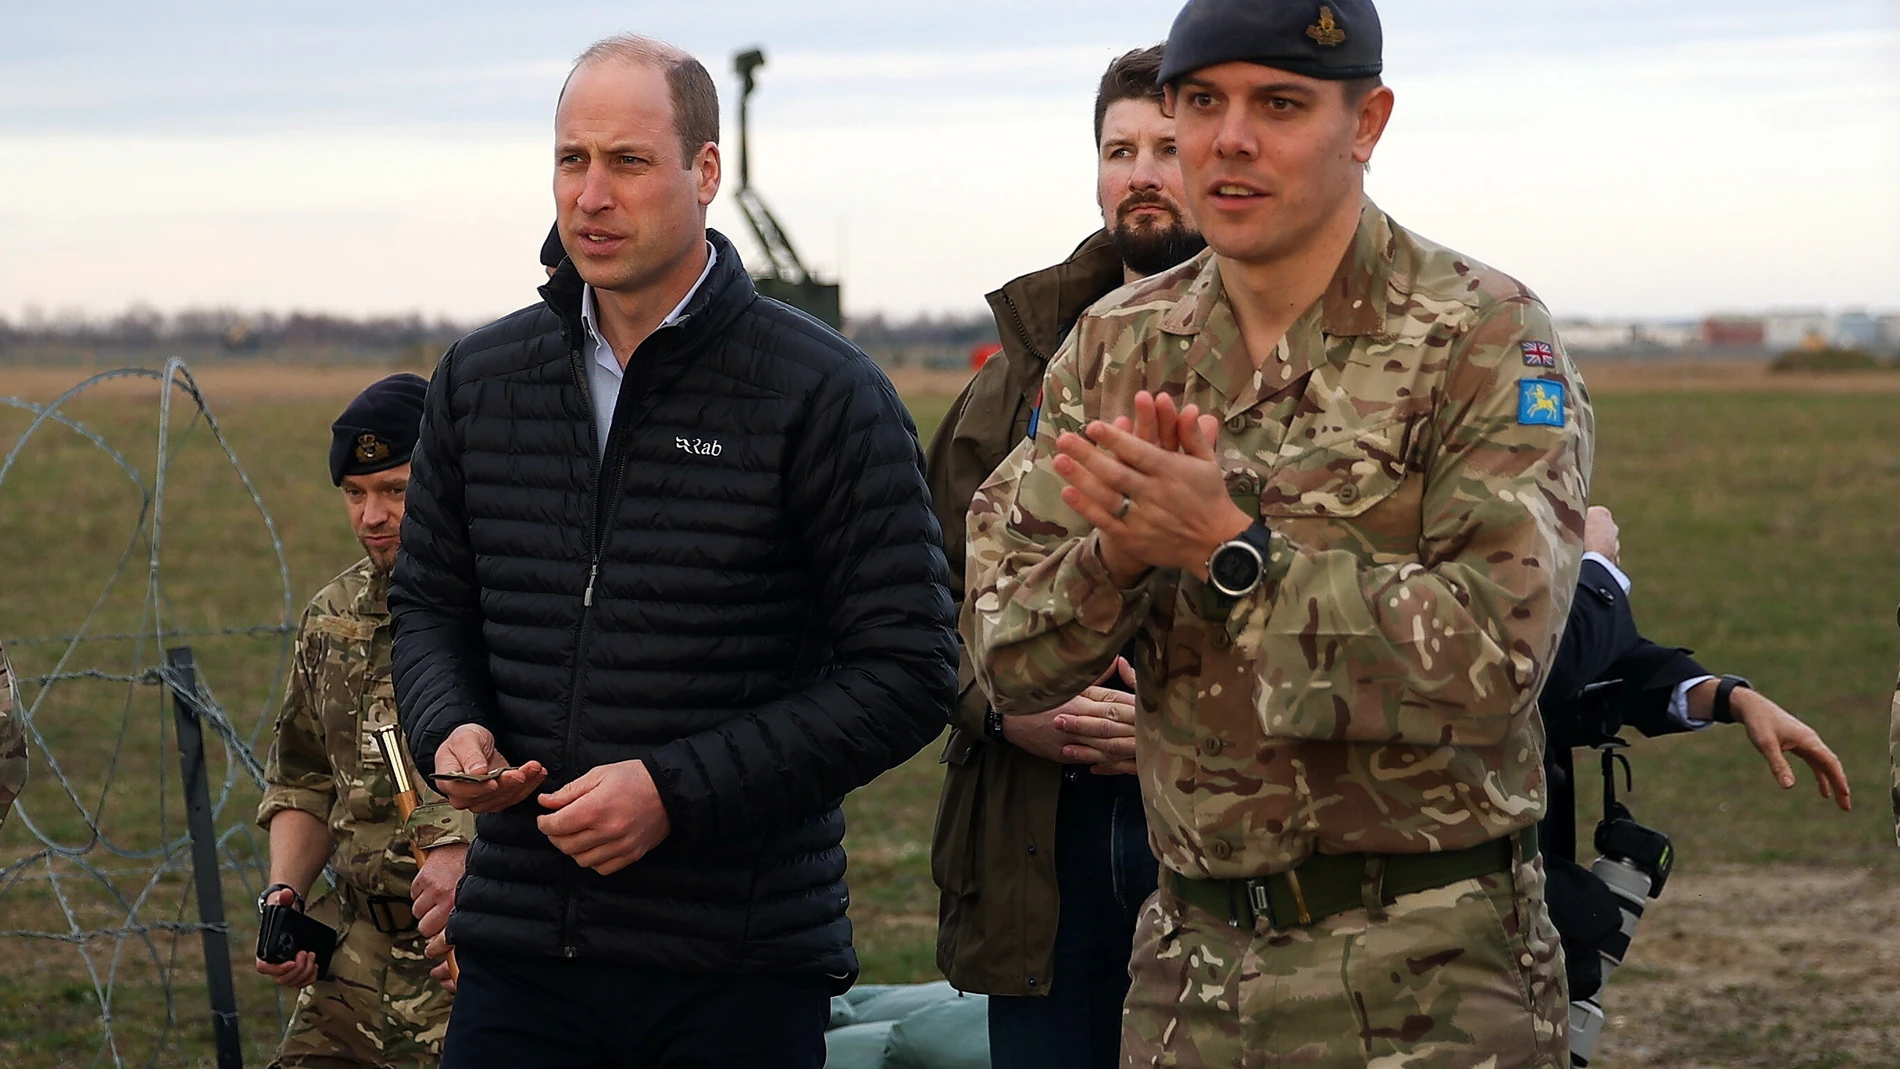 Jasionka (Poland), 22/03/2023.- Britain's Prince William (L) meets with soldiers during a visit of the British military base in Jasionka, southeast Poland, 22 March 2023. The Prince of Wales arrived for a two-day visit to meet British and Polish troops based near the border with Ukraine. (Polonia, Ucrania, Reino Unido) EFE/EPA/Lukasz Gagulski POLAND OUT 